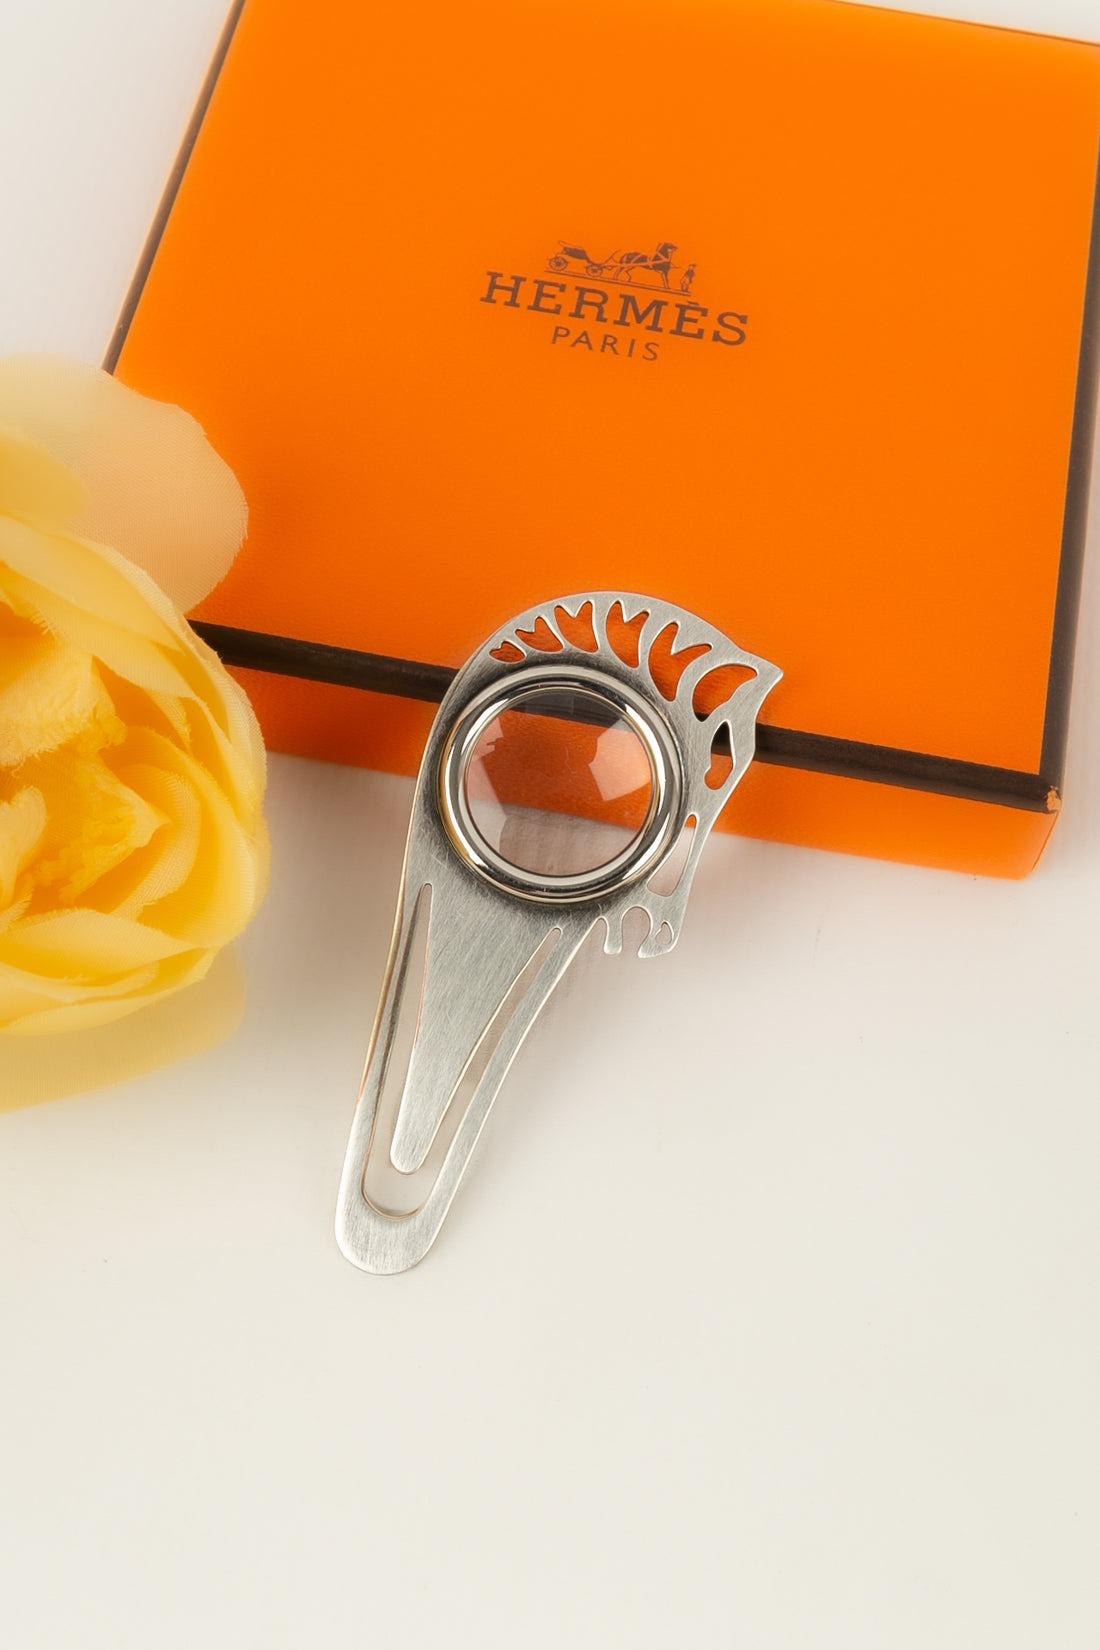 Hermès Mini Magnifying Glass in Silver-Plated Metal For Sale 3